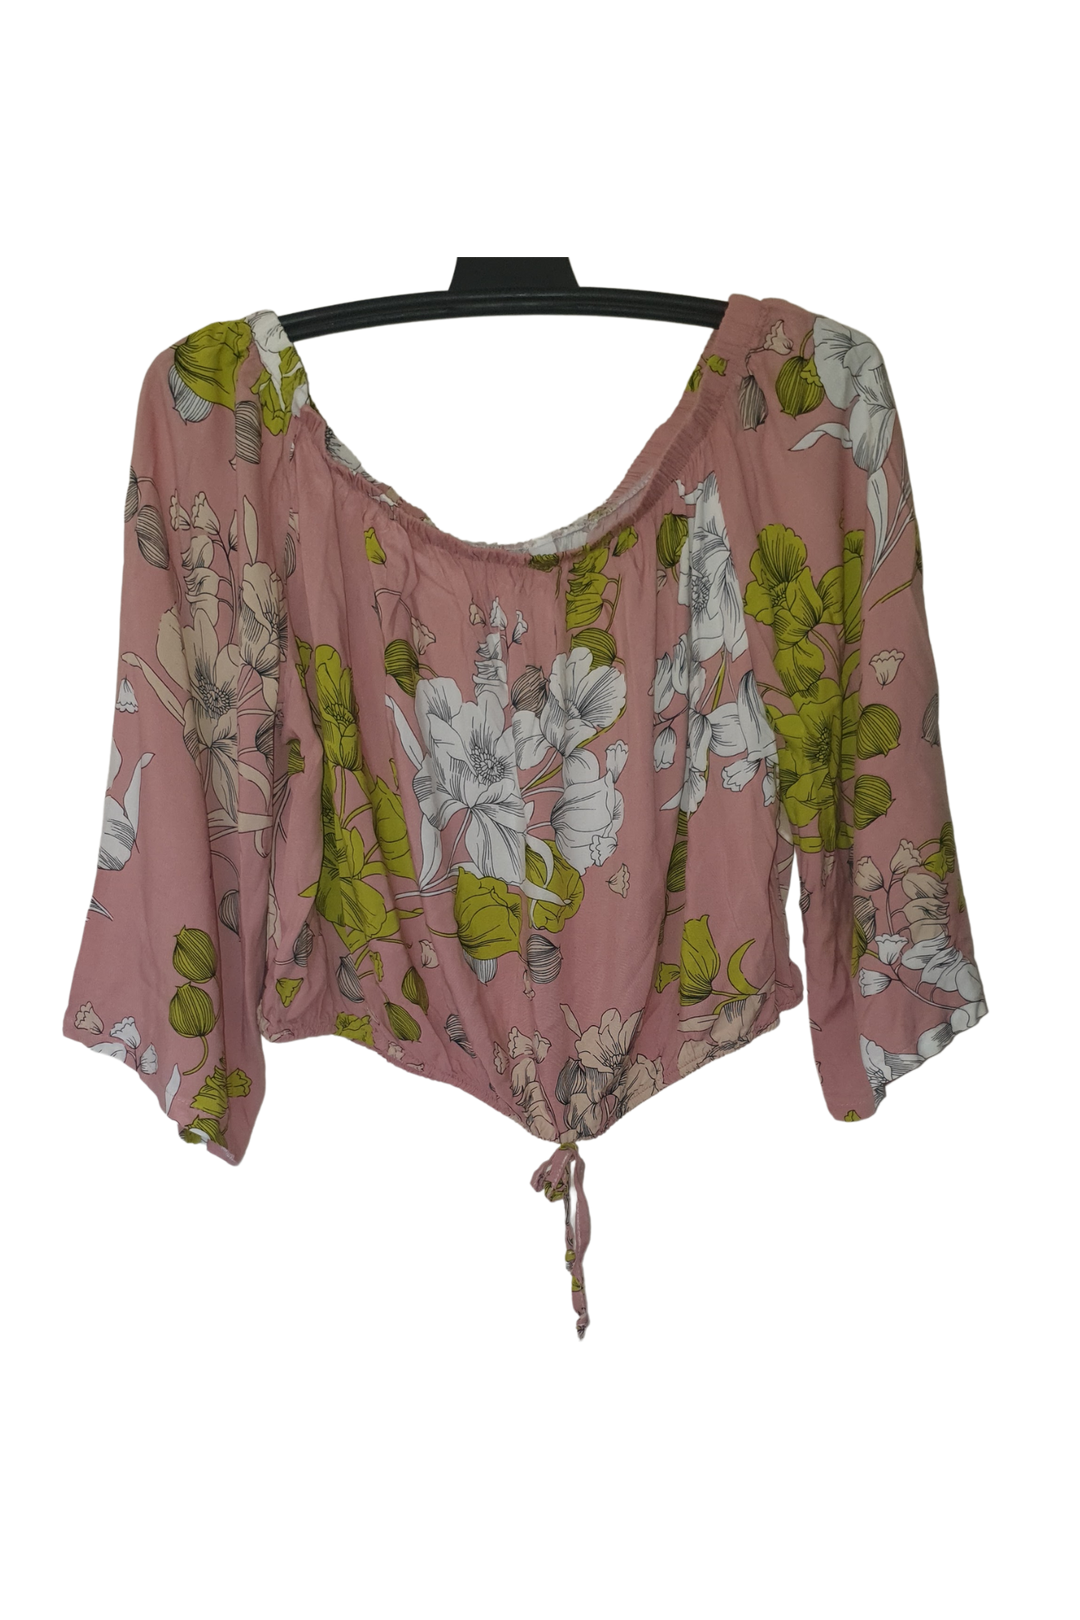 CROP PINKISH BLOUSE WITH DRAW STRING NECK